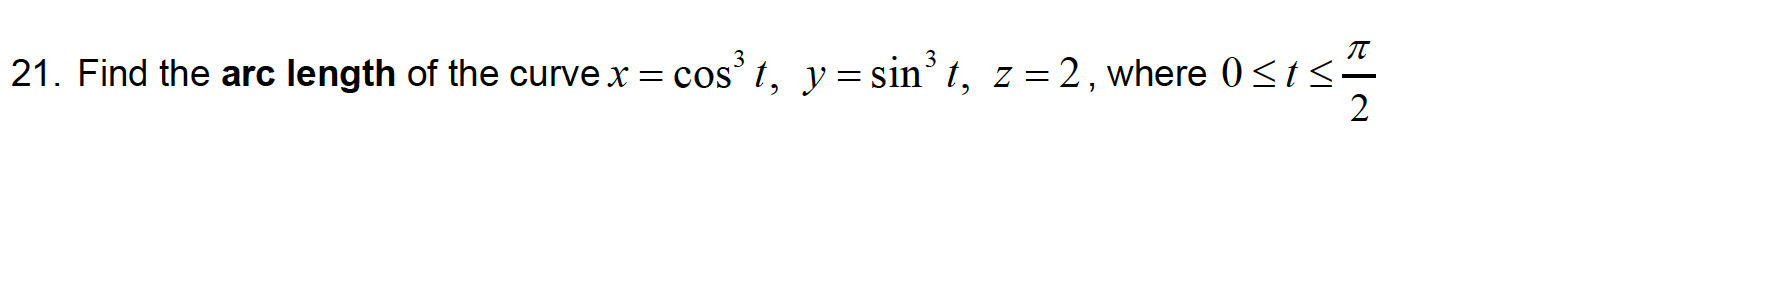 21. Find the arc length of the curve x = cos' t, y= sin' t, z=2, where 0<t<.
2
